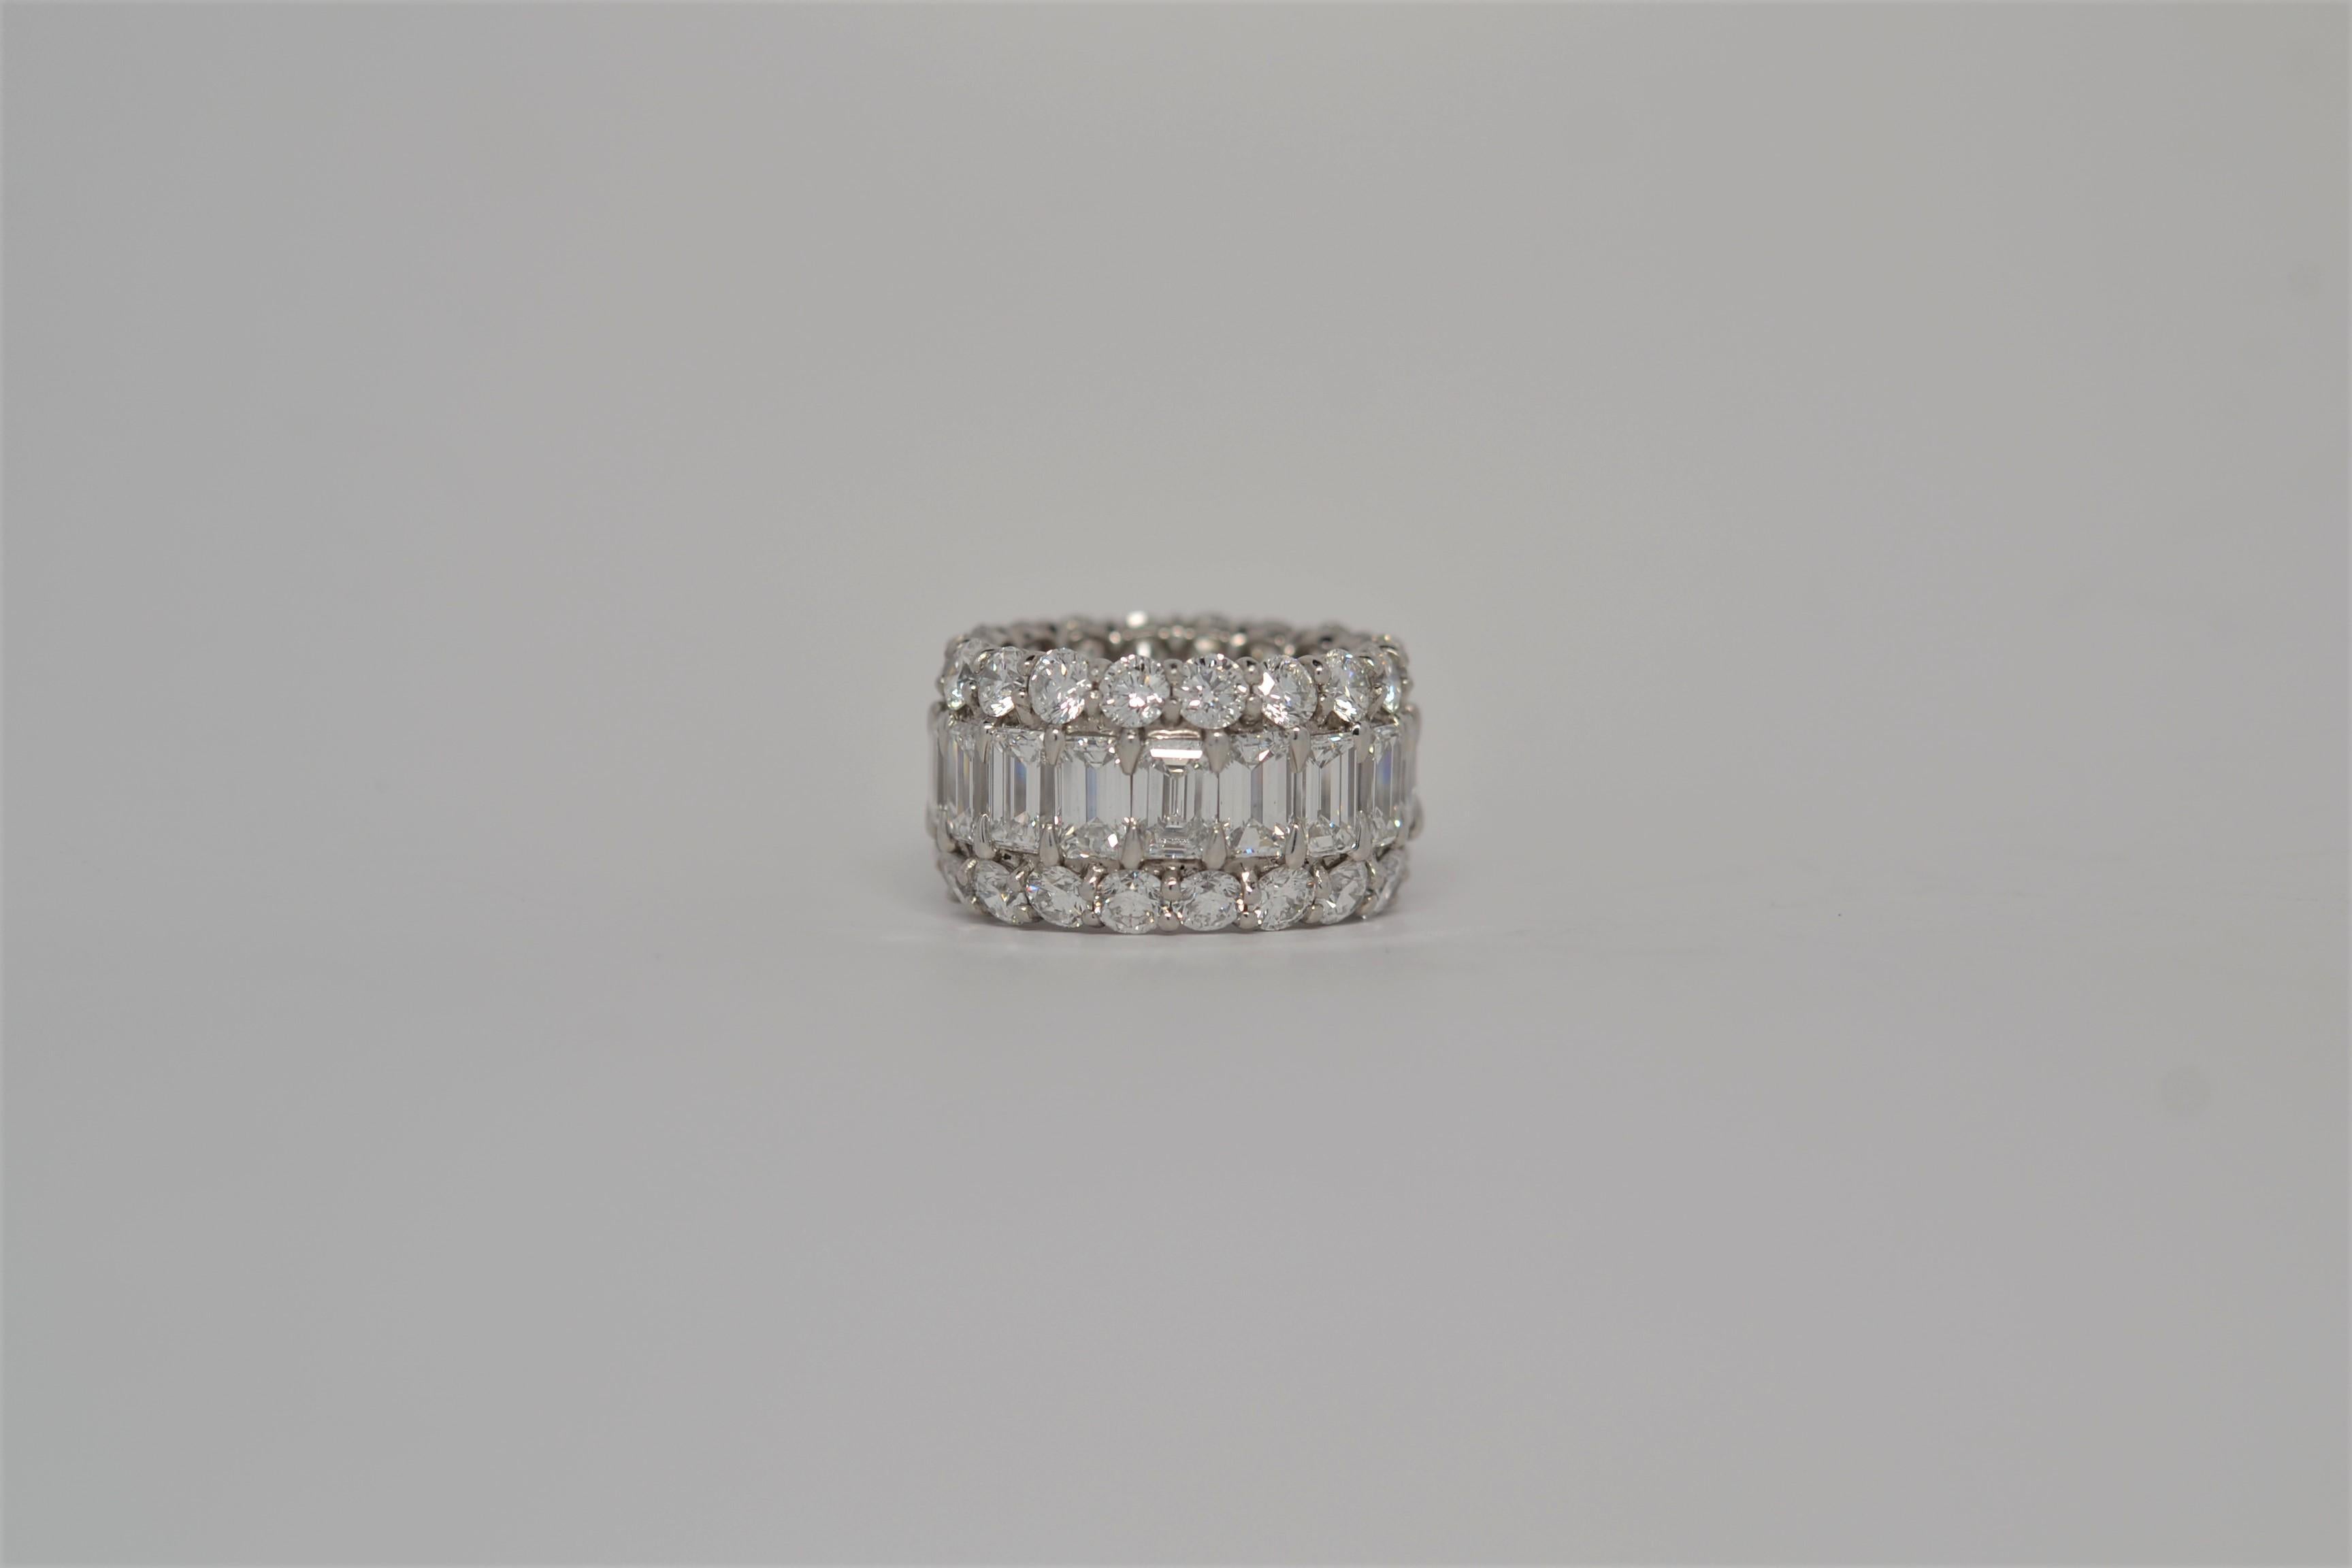 An elegant ladies' Platinum eternity ring set all the way around with Emerald Cut and Round Brilliant Cut Diamonds. The handmade ring uses a three row layout with a center of Emerald Cuts and two rows of Round Brilliant Cut Diamonds. The Emerald Cut